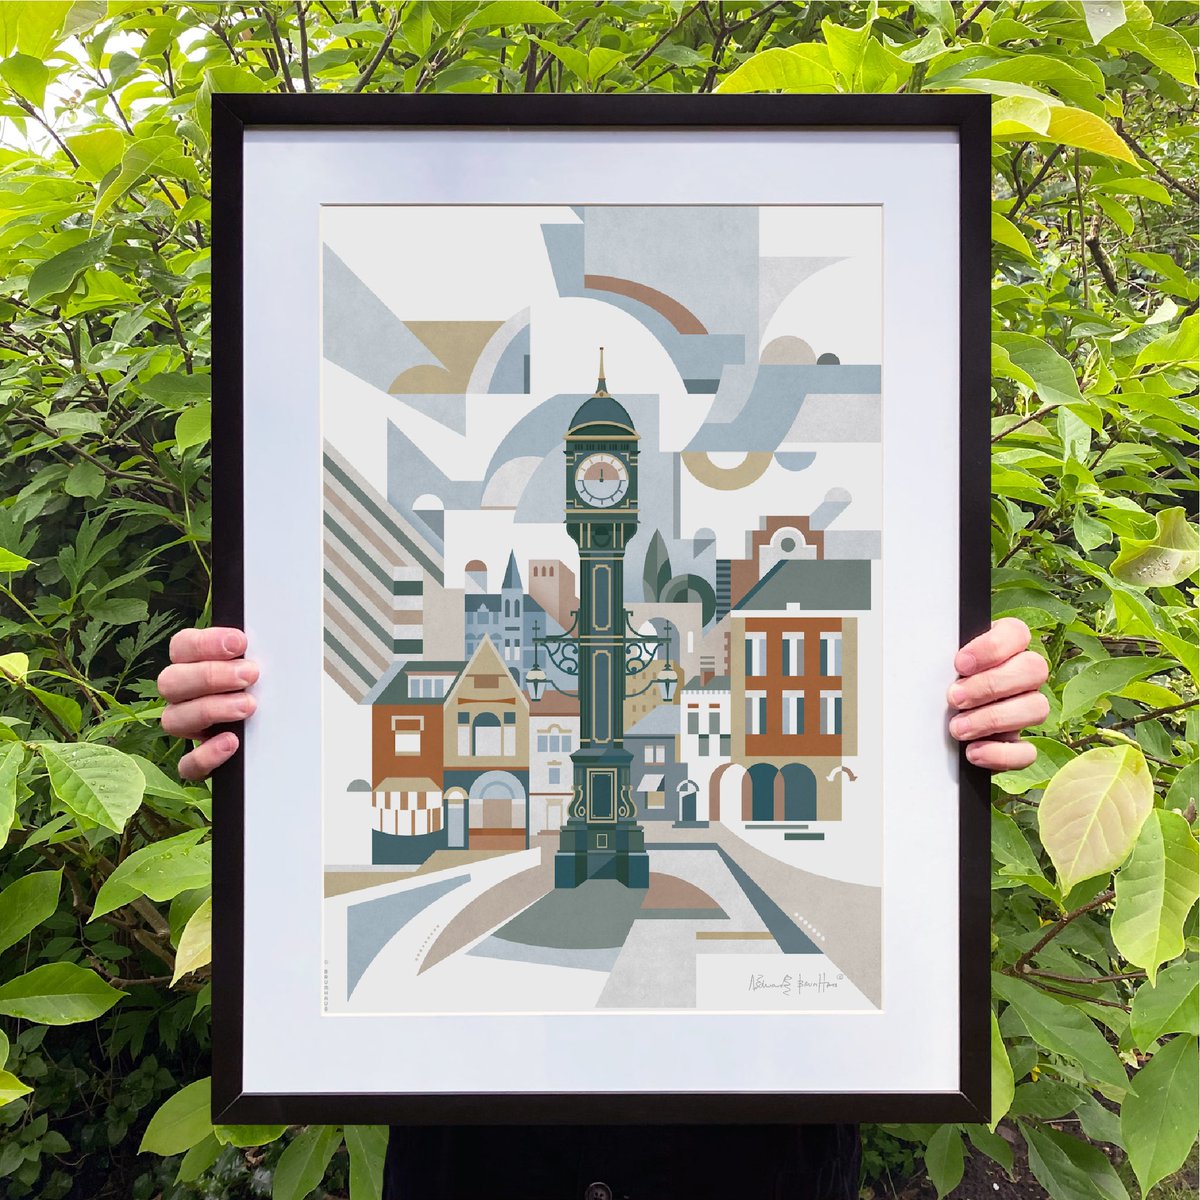 Exciting news! 🤩 I'm thrilled to be at the launch of the JQ's newest gem: a FREE Outdoor Artisan Market from the amazing people who brought you Kings Heath Artisan Market! 🛍️🎉 I will have my art prints of Birmingham from size A4 & up. #JQArtisanMarket #JQ #Birmingham #Brum